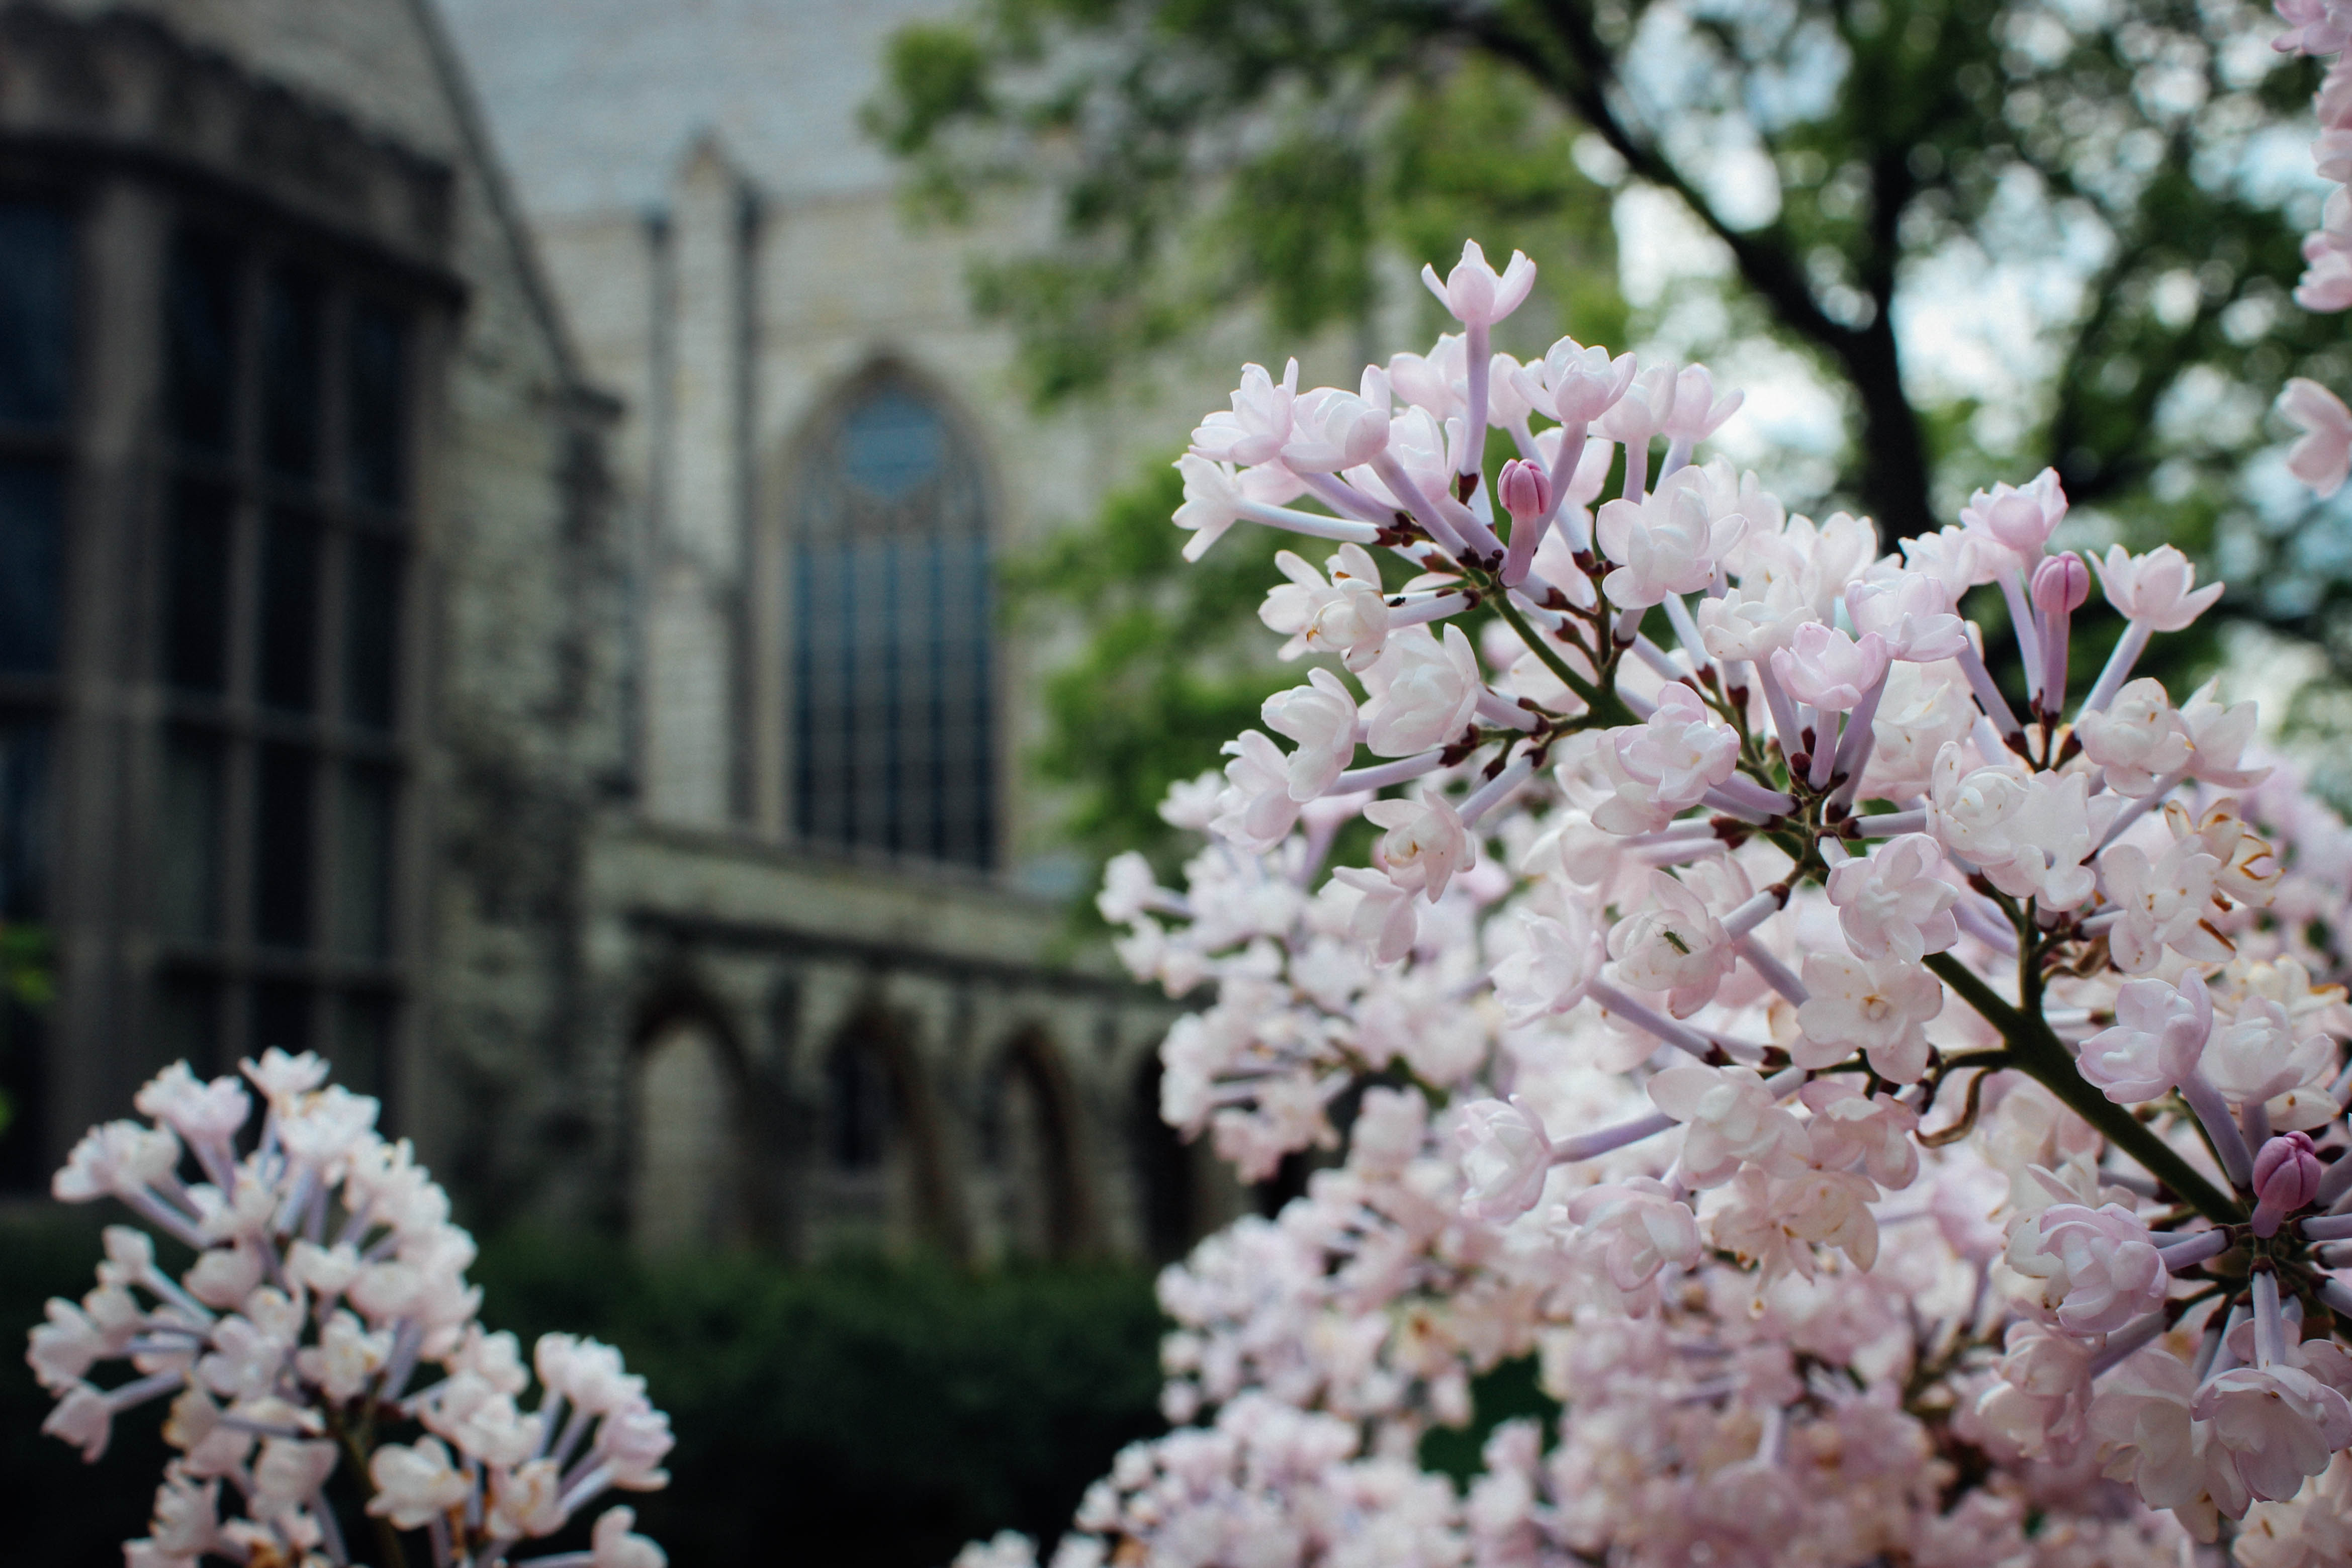 Close-up photo of a branch covered in pink blossoms s in front of campus building with gothic-style cathedral windows..